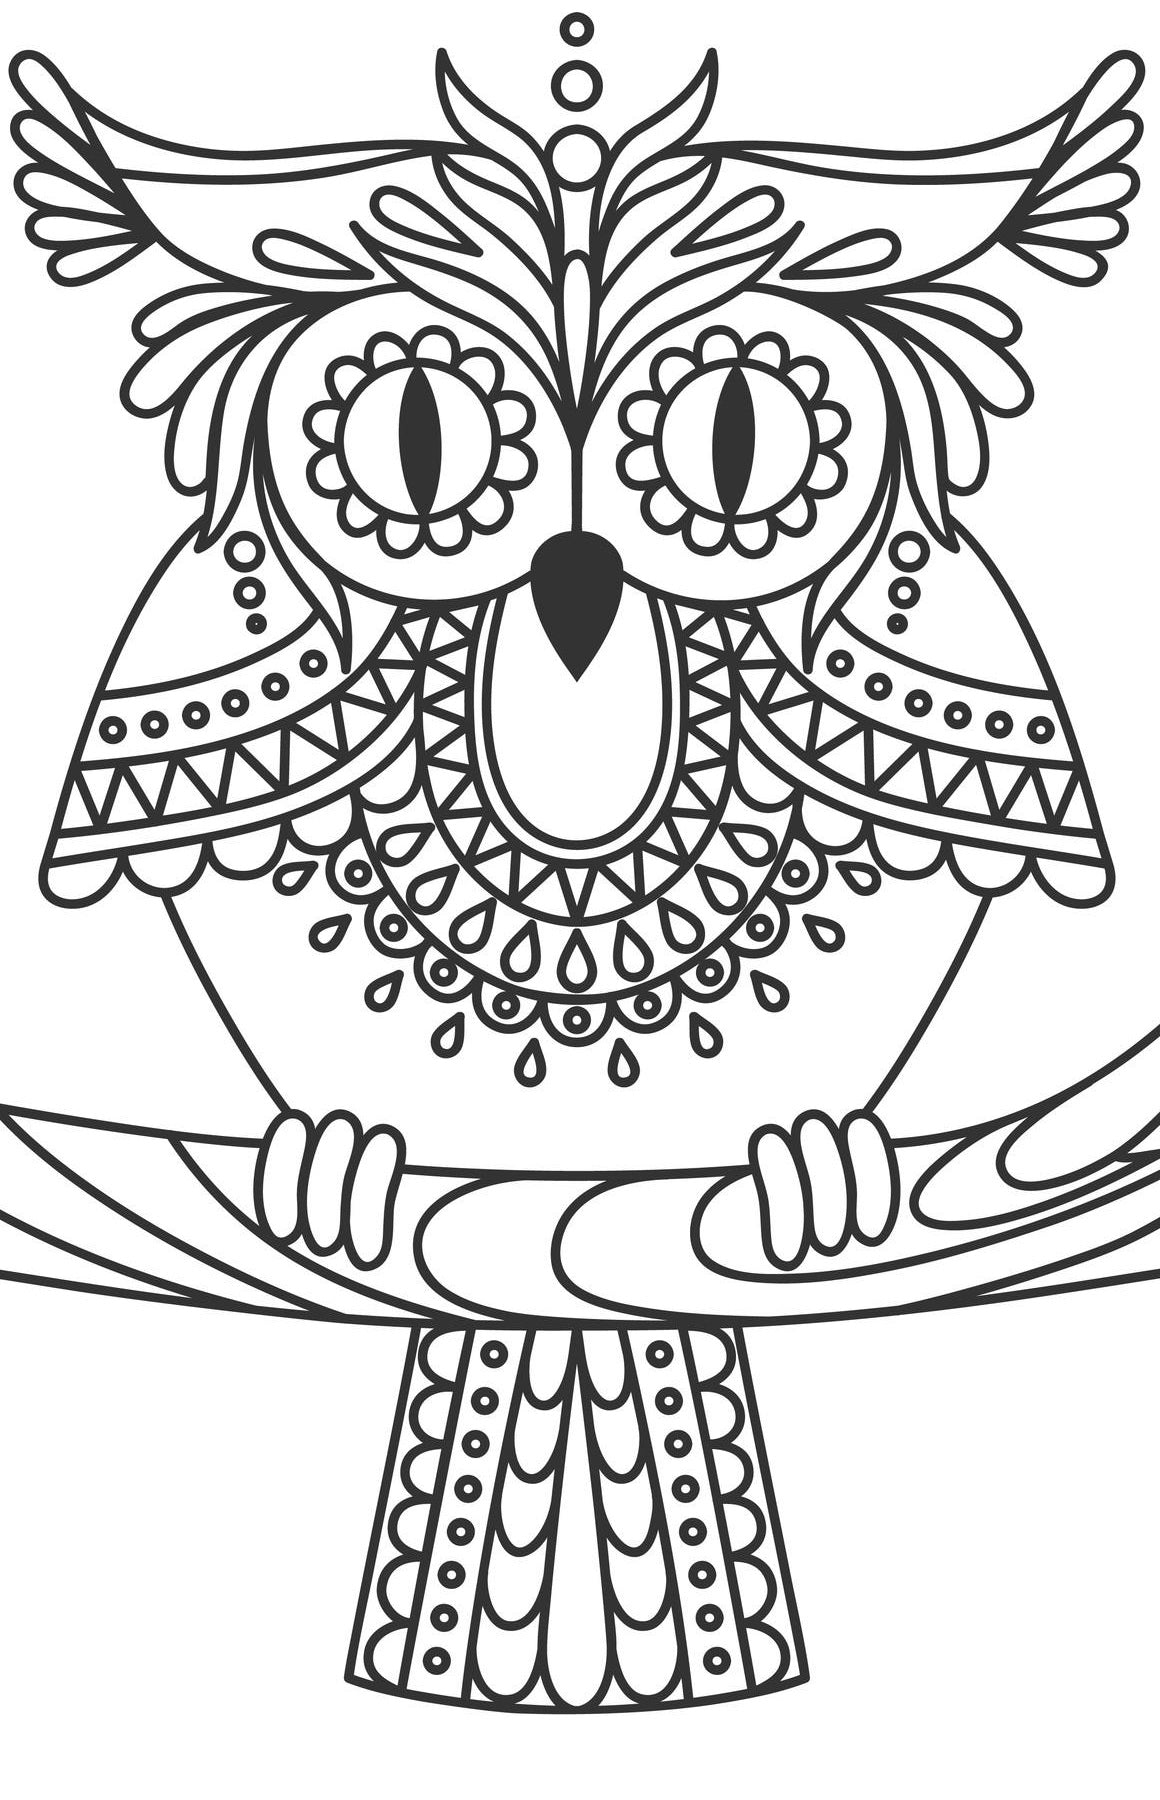 Large Print OWLS PDF Coloring Book For Beginners, Seniors or Visually Impaired